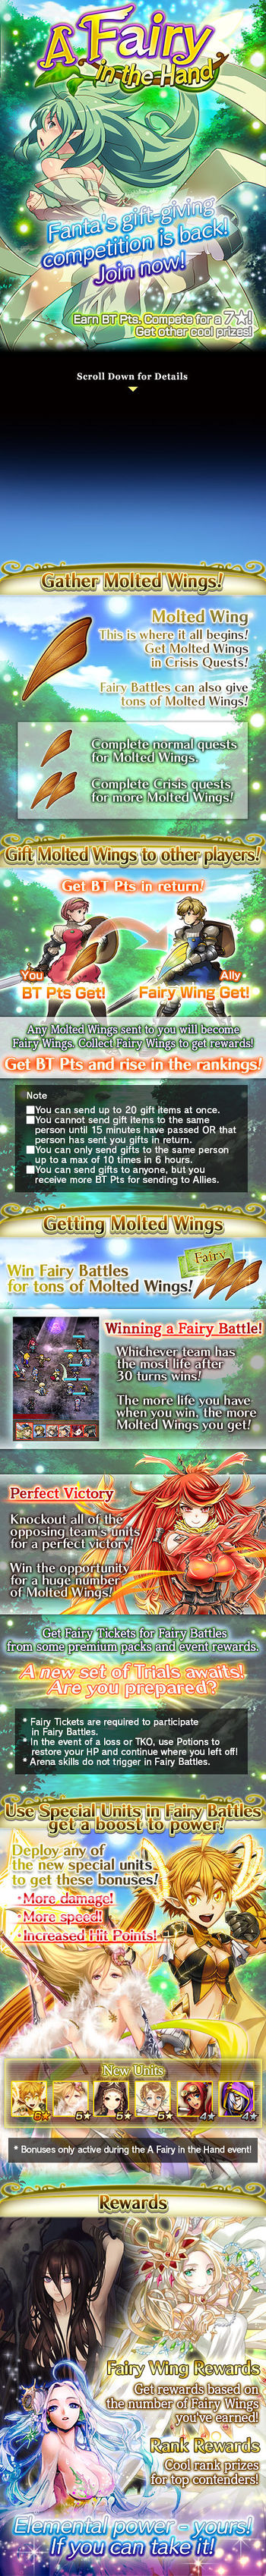 A Fairy in the Hand release.jpg